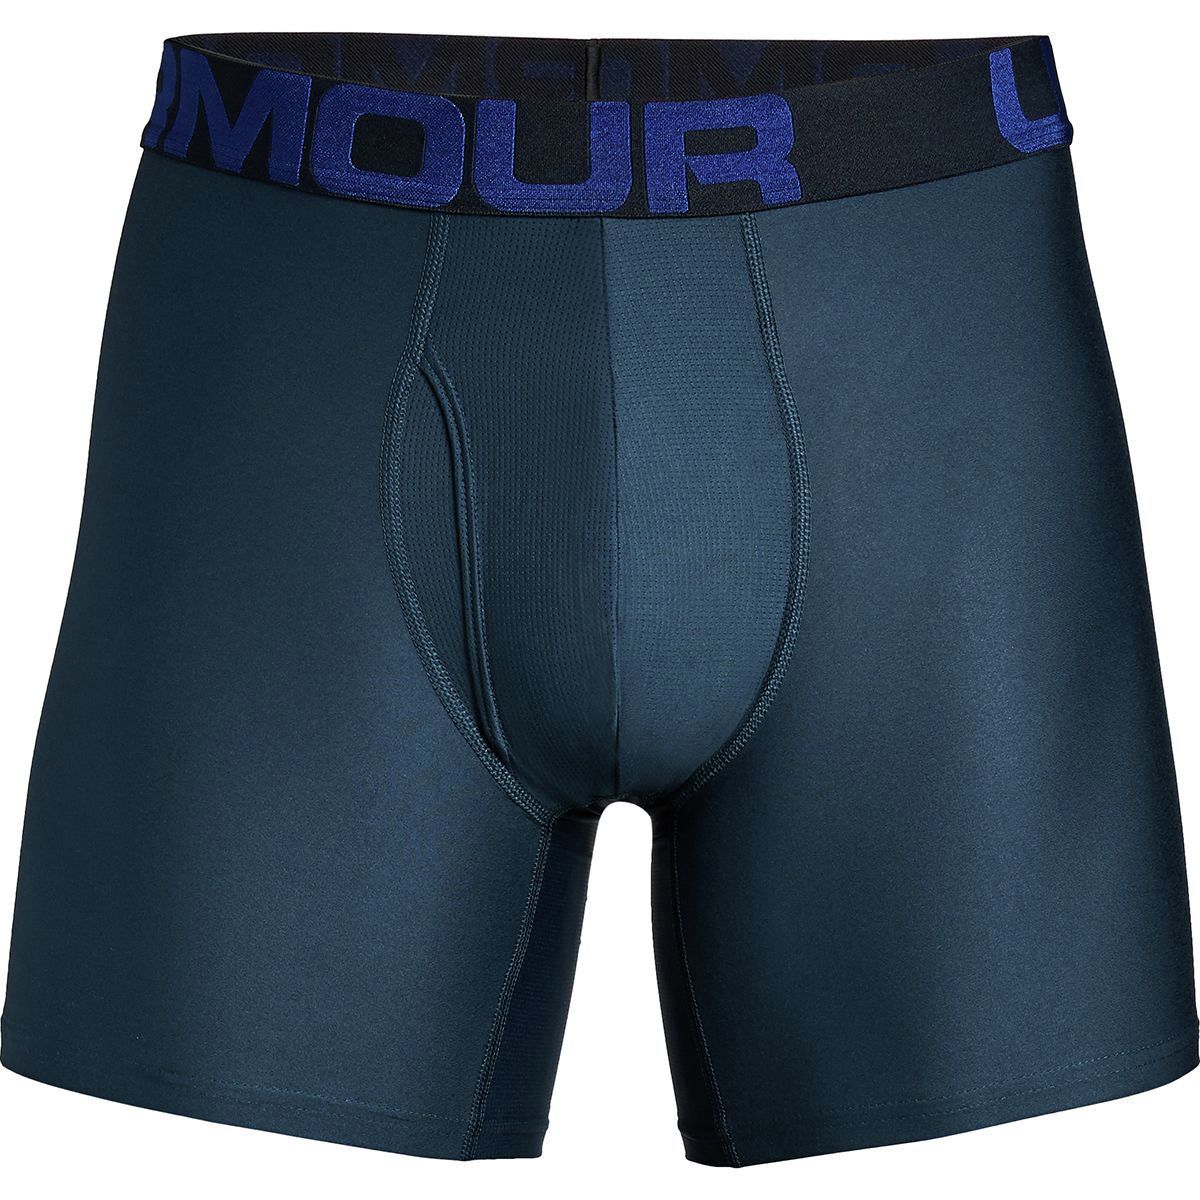 Under Armour Tech 6in Underwear - 2-Pack - Men's | Backcountry.com